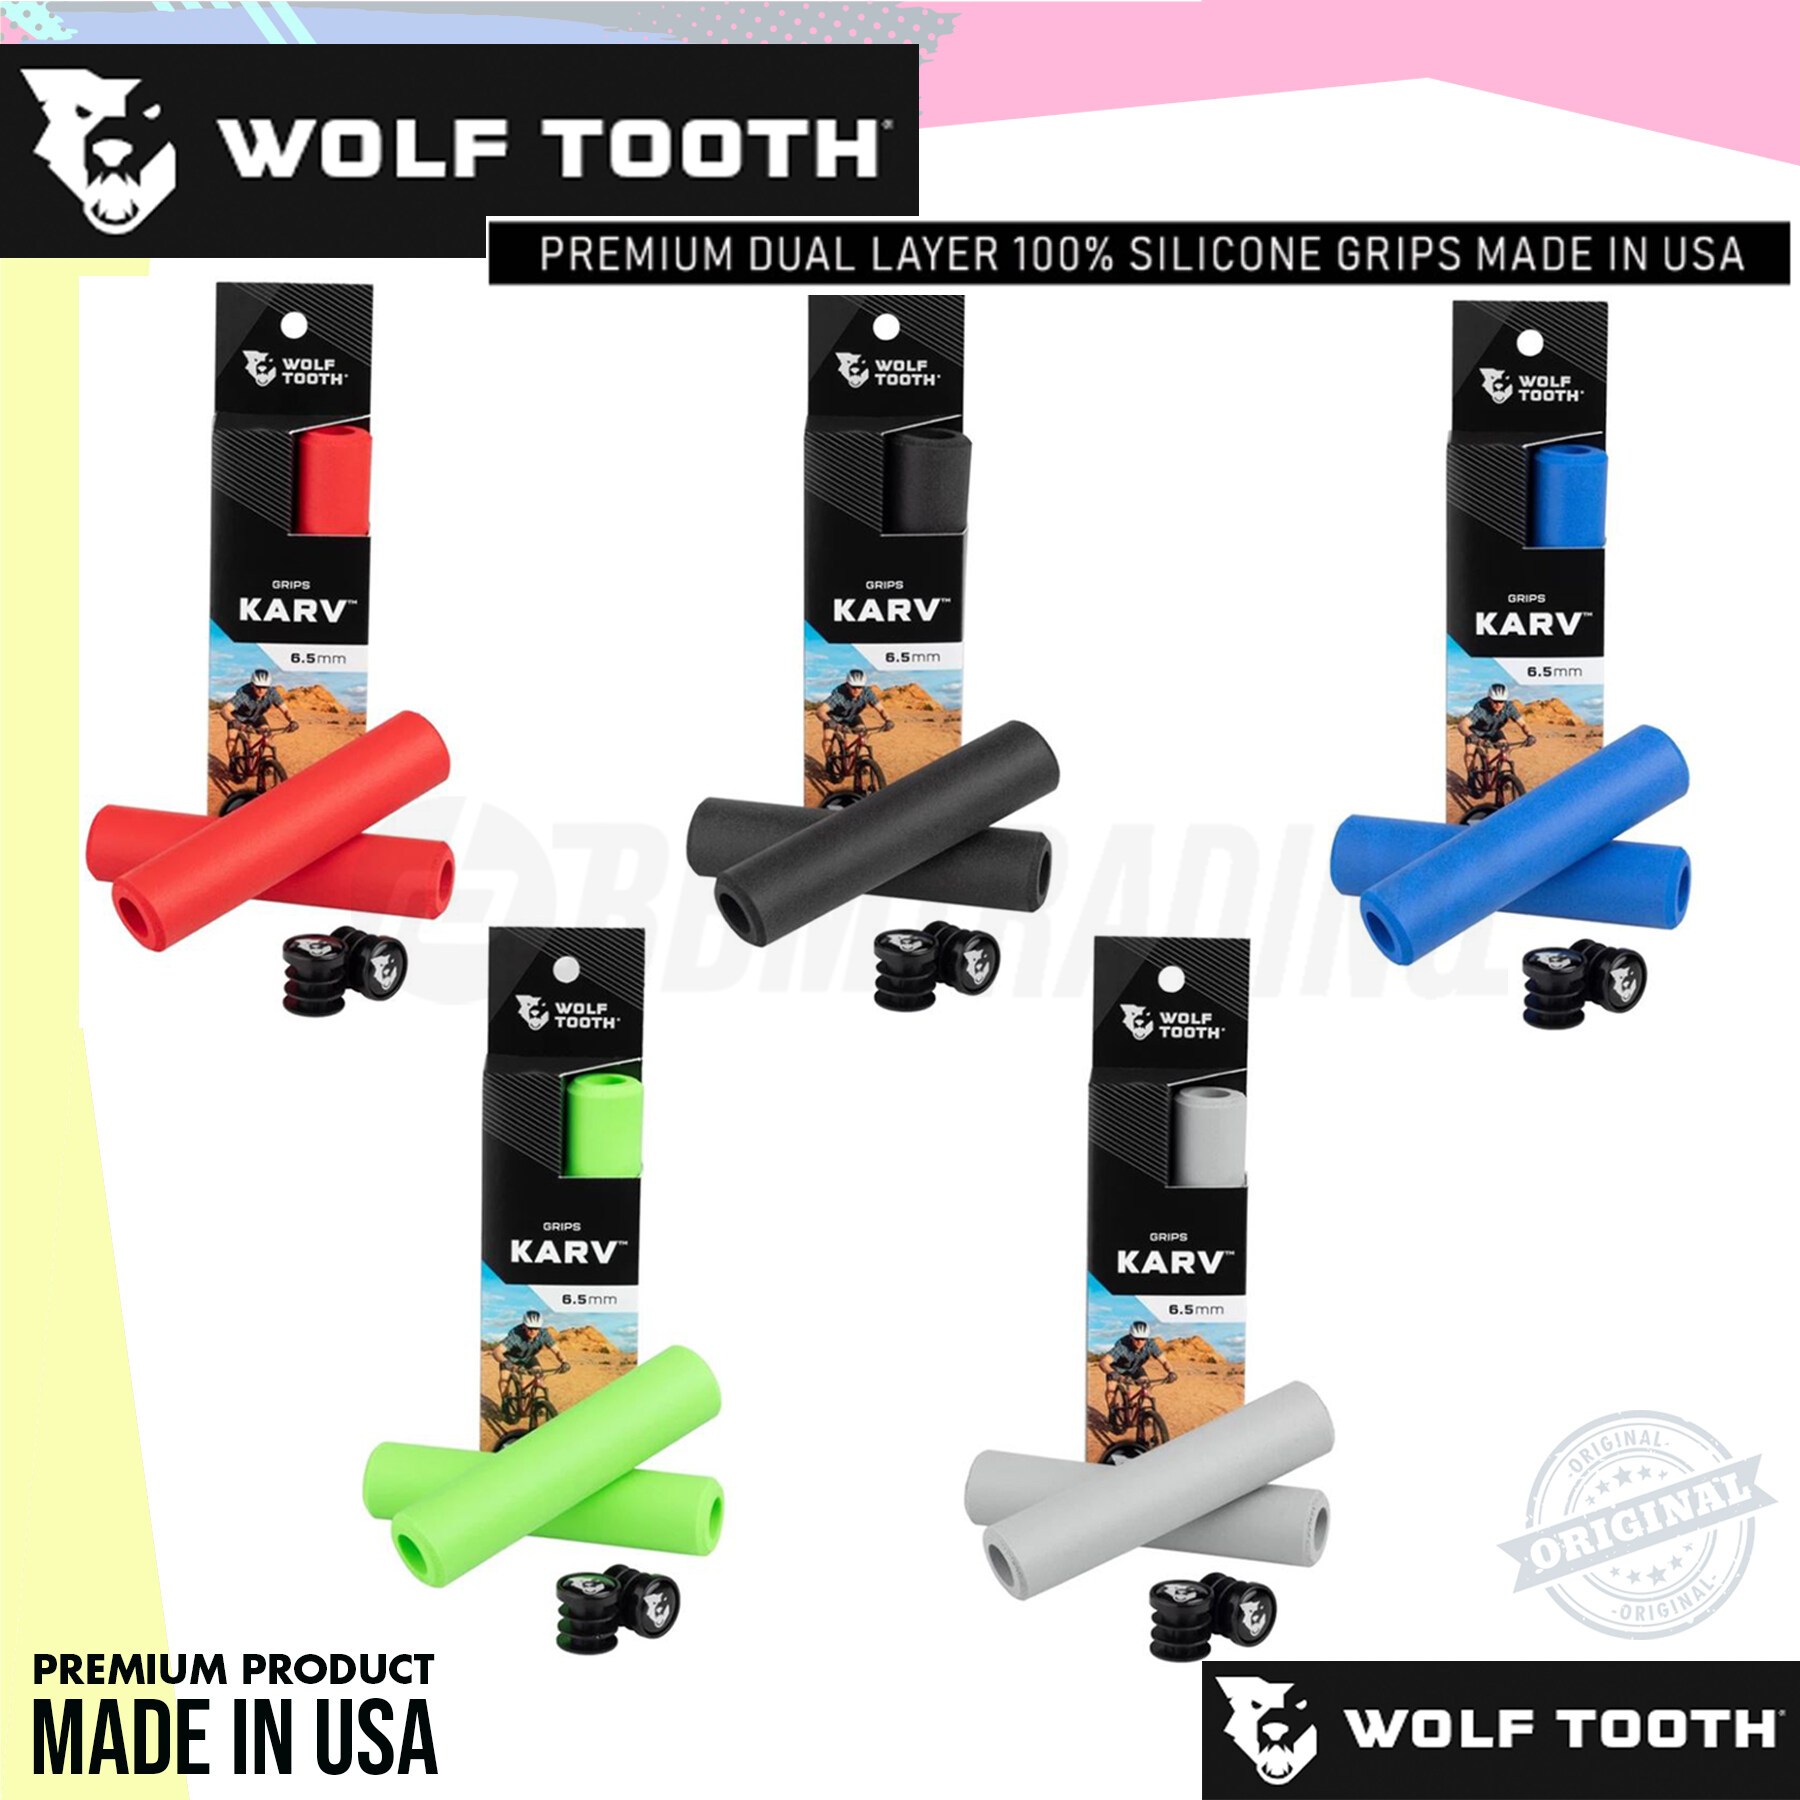 Wolf Tooth Karv Grips 6.5mm Purple Reduces Hand Fatigue and Numbness 